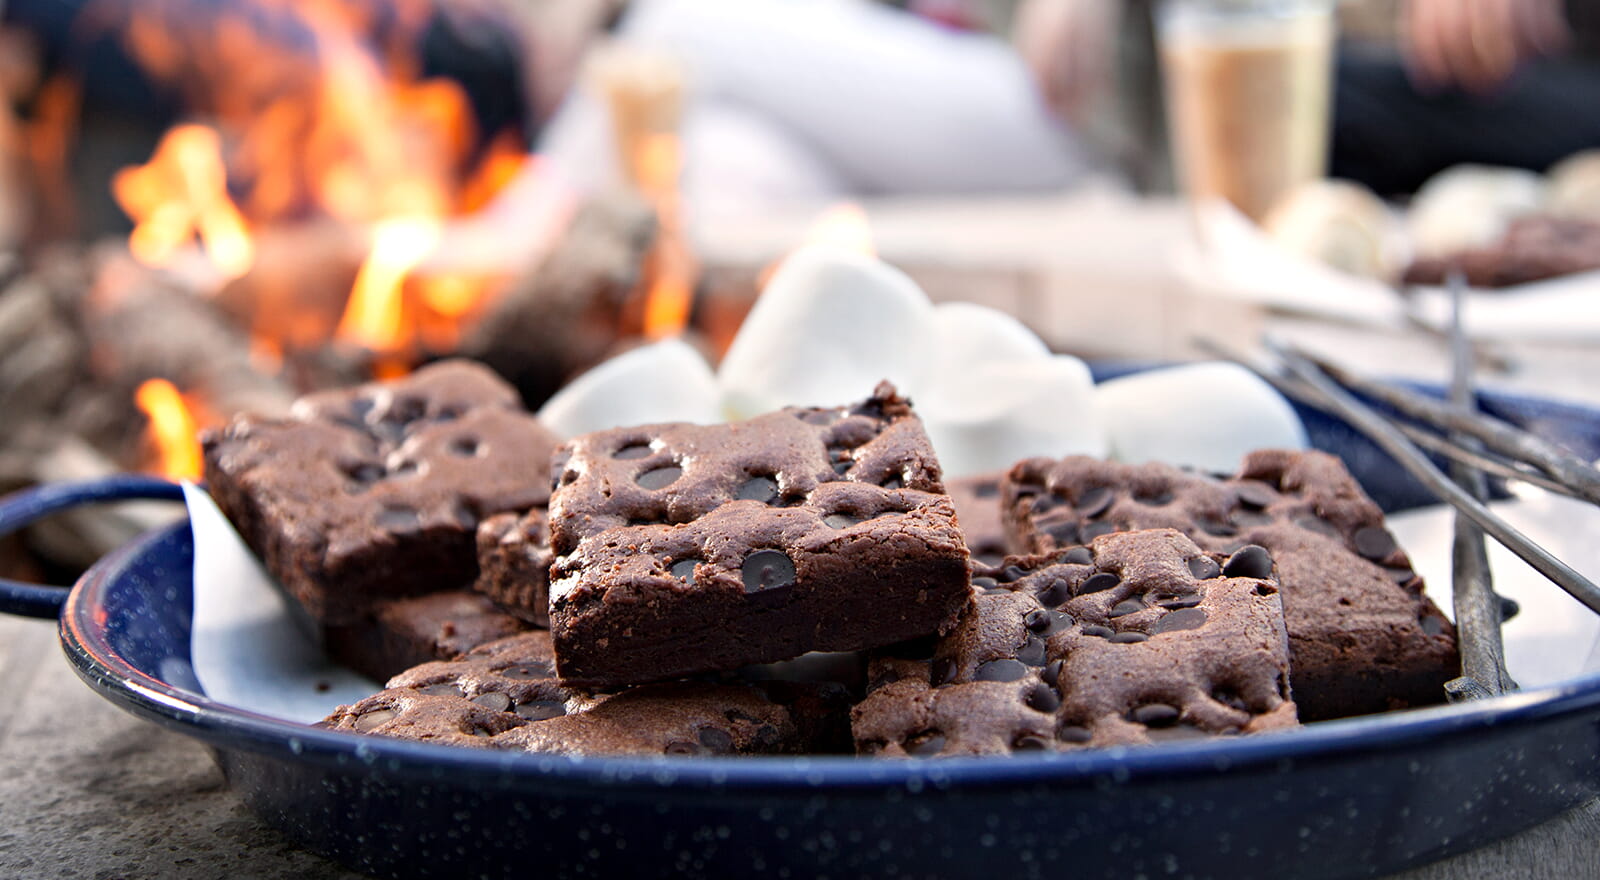 Brownie S'mores